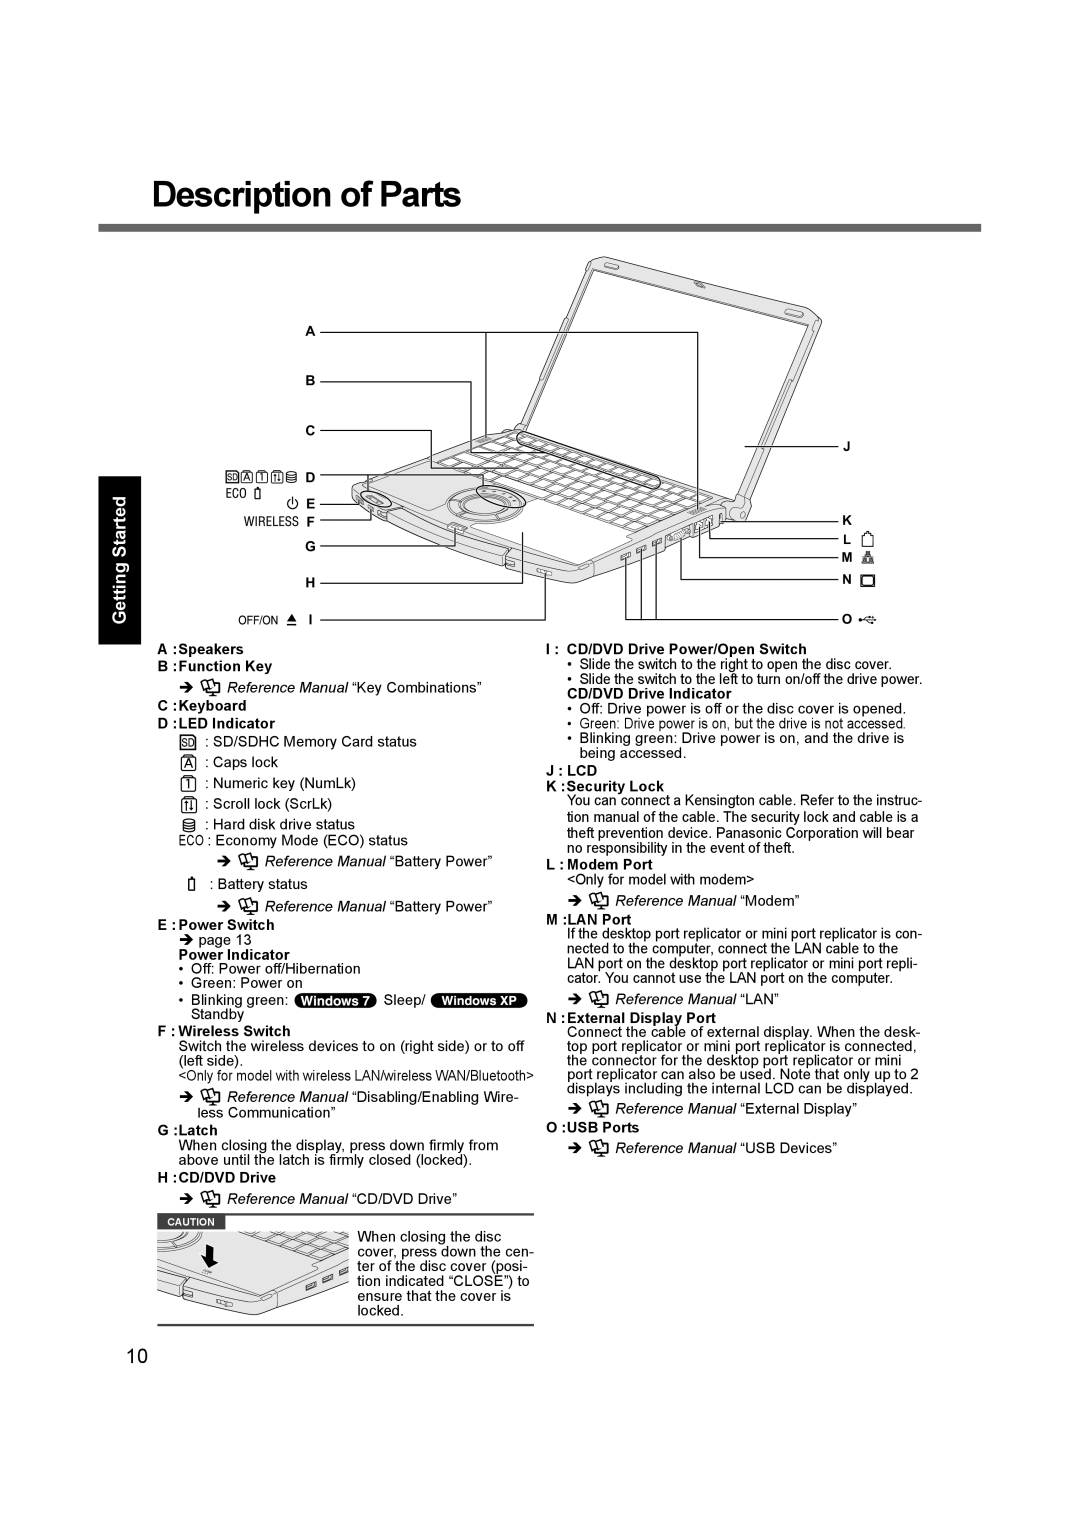 Panasonic CF-F9 Description of Parts, Getting Started, A Speakers B Function Key, Î Reference Manual “Key Combinations” 